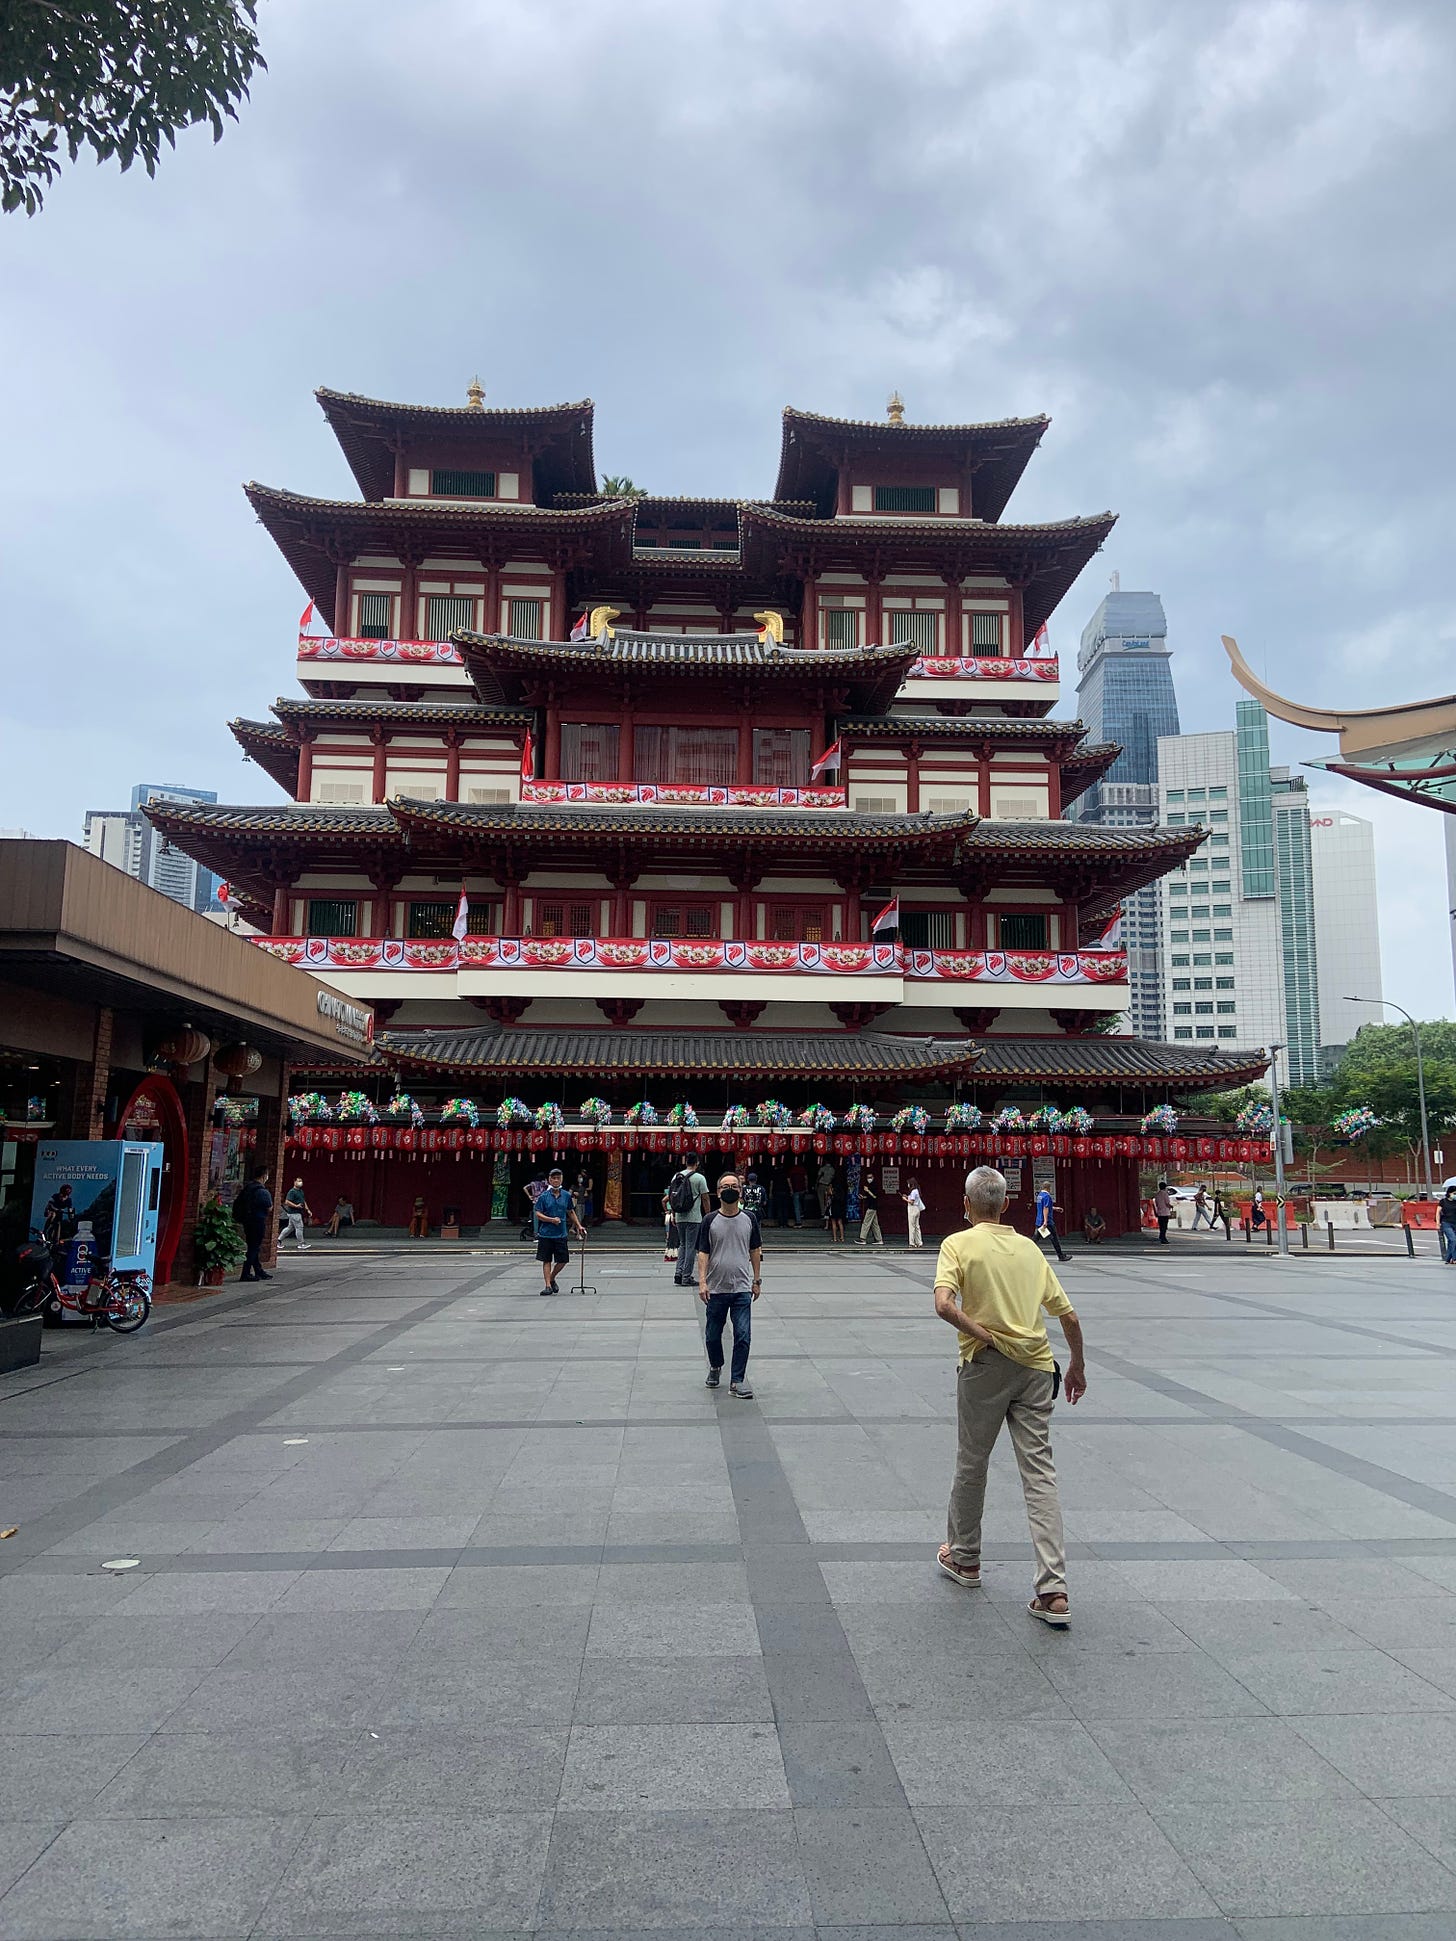 Red buddist temple, featuring a older man in a yellow shirt